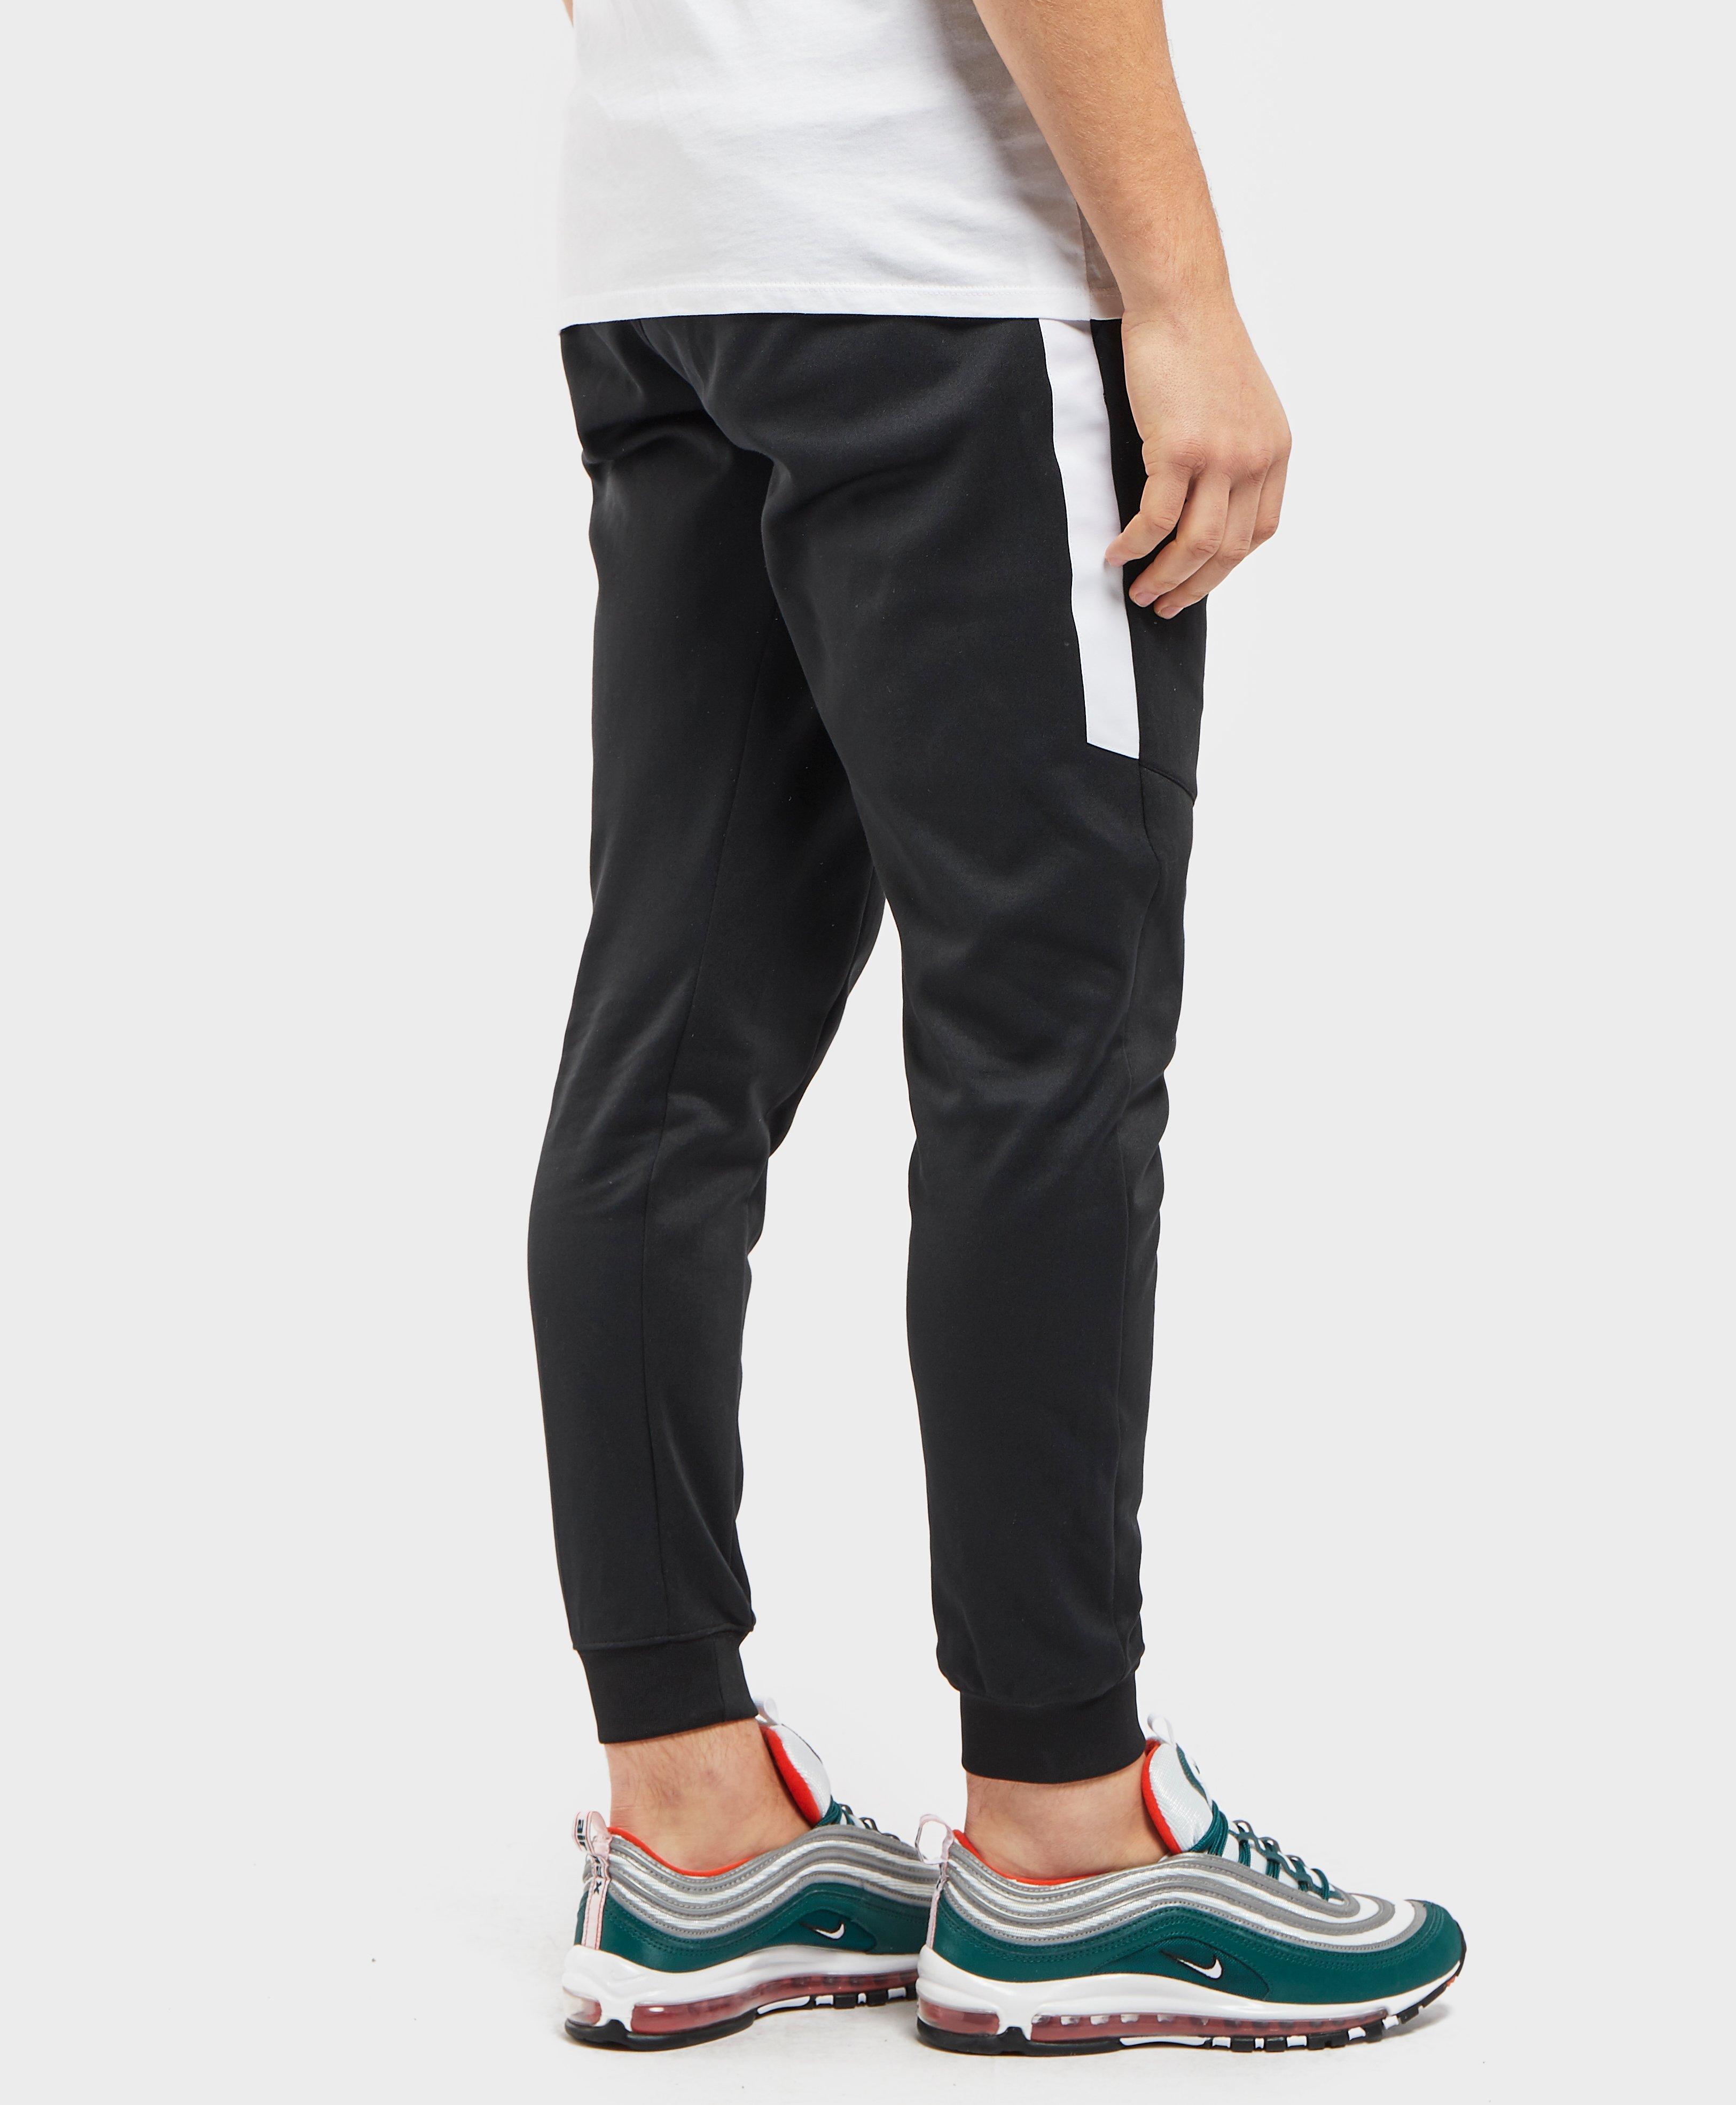 Nike Synthetic Tribute Dc Track Pants 